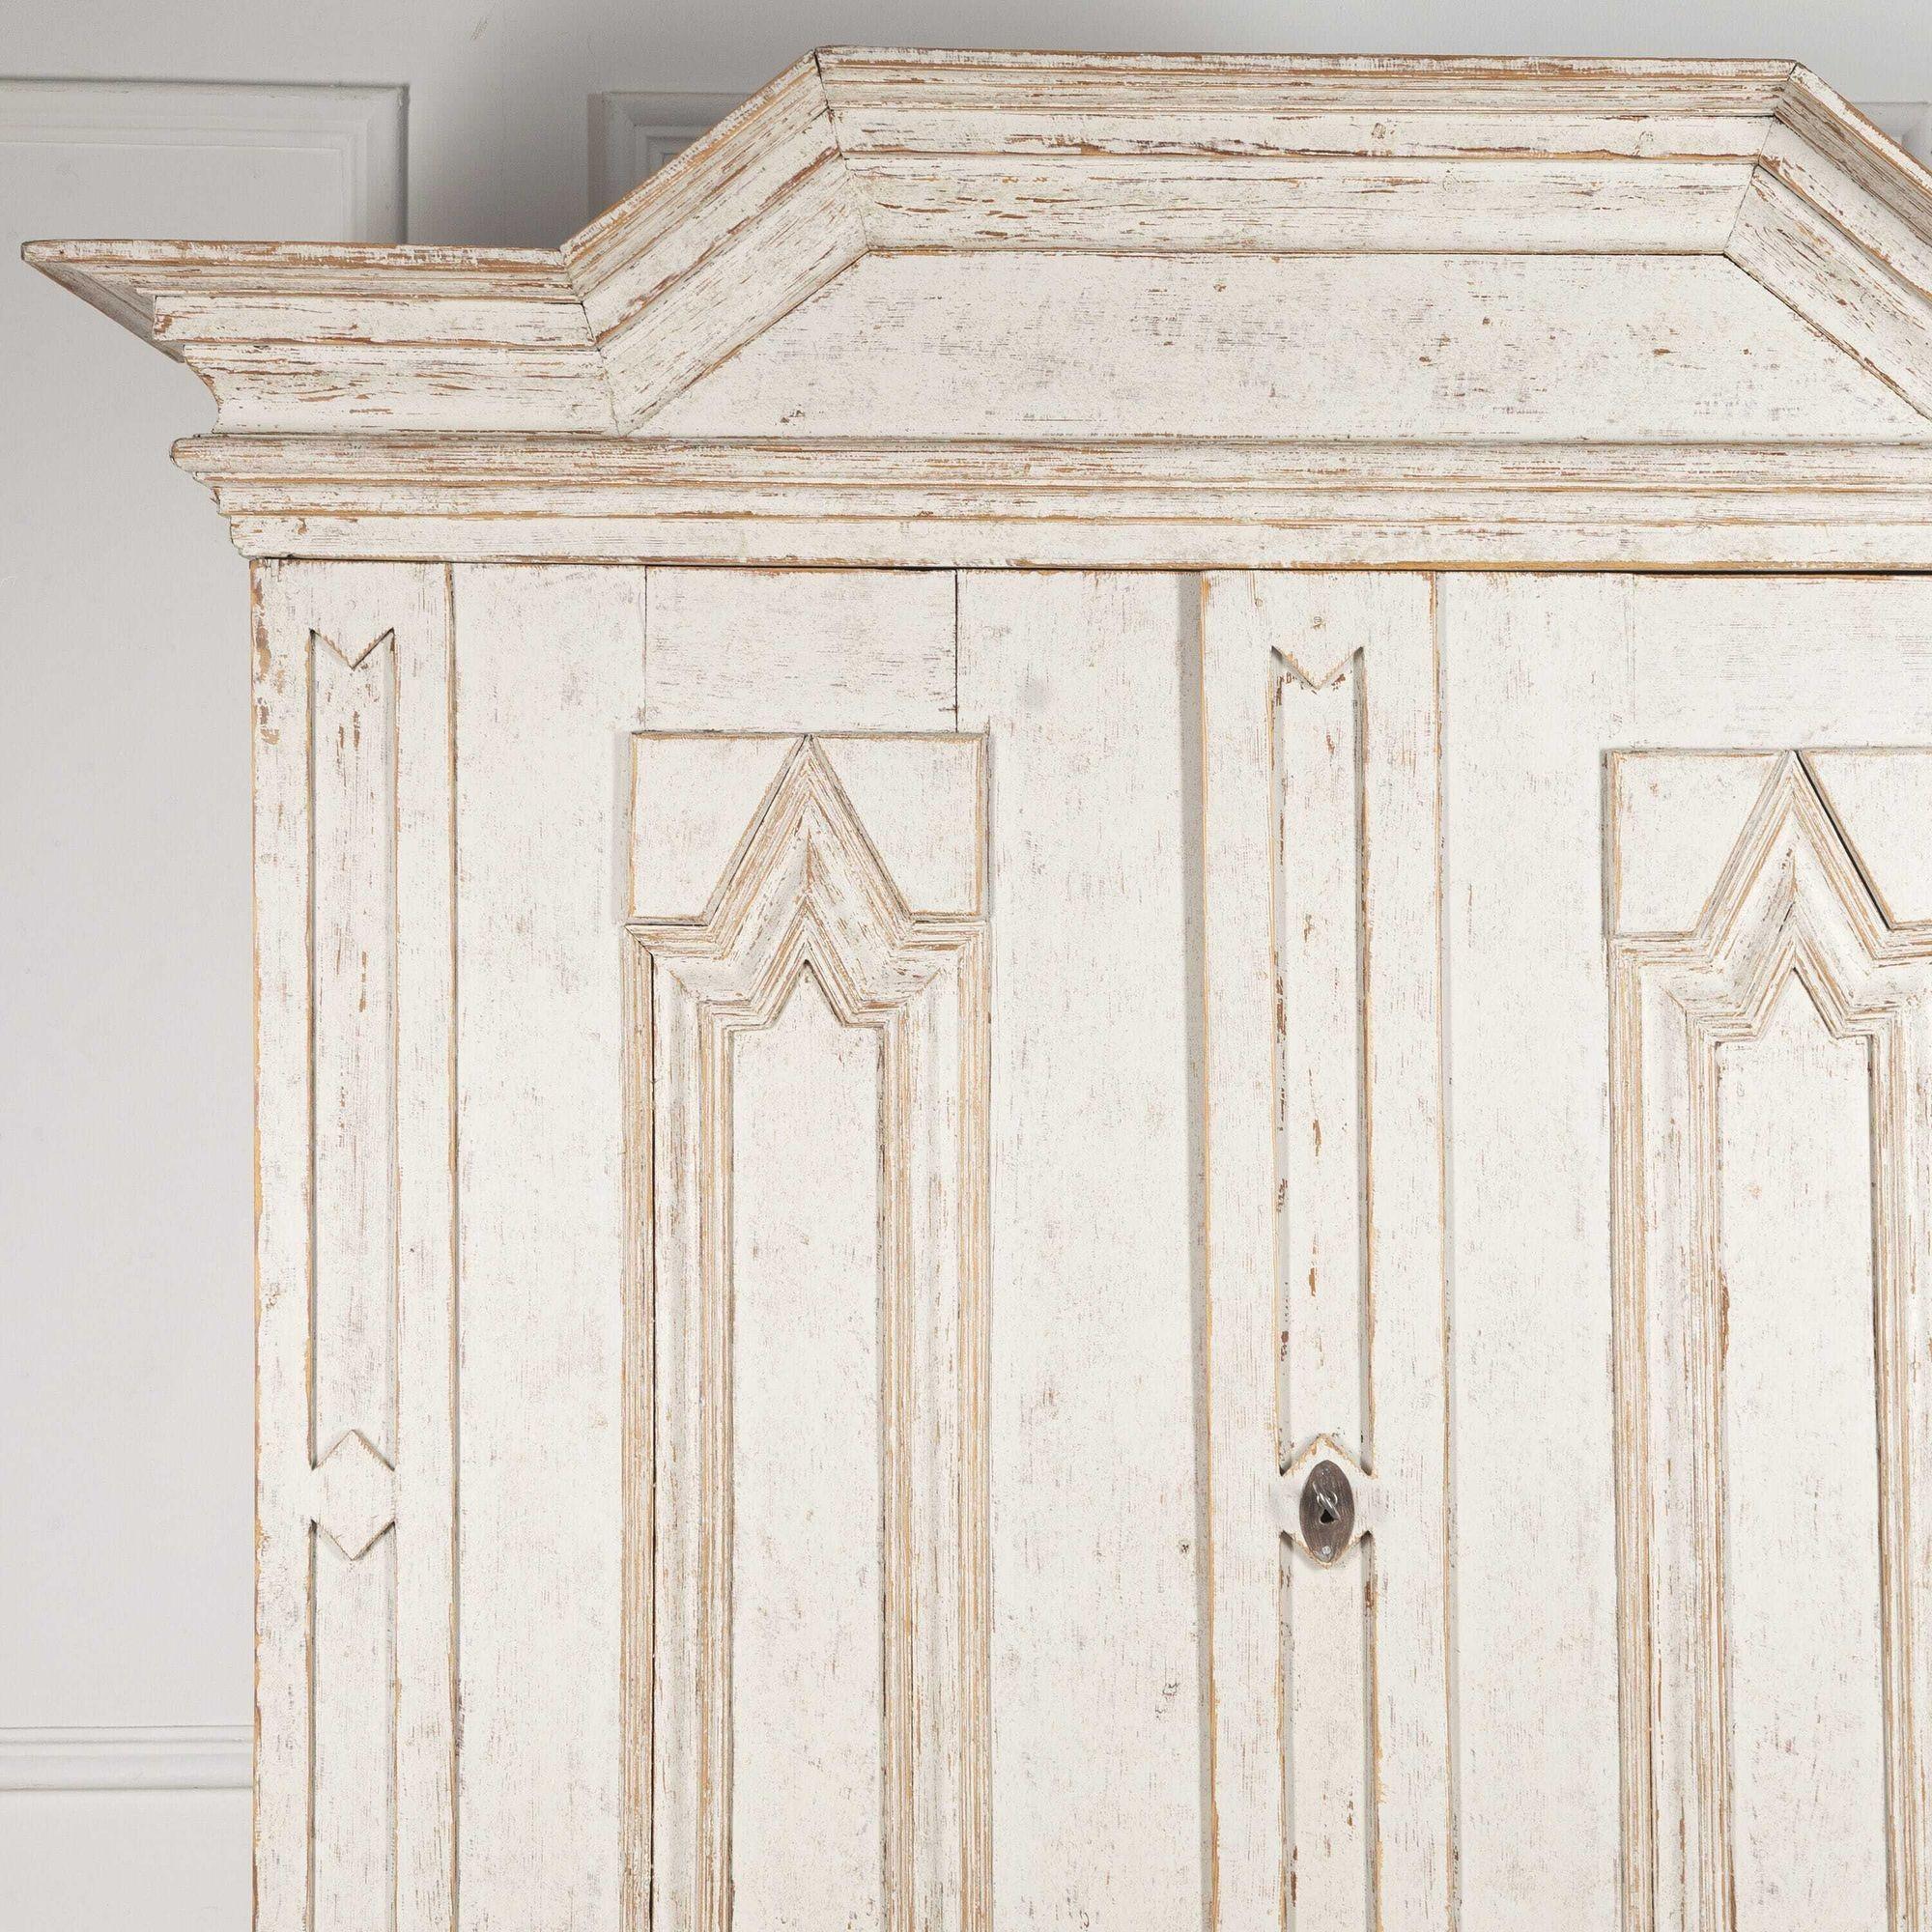 Wood Swedish Painted Armoire Cabinet, 18th c. Baroque Period